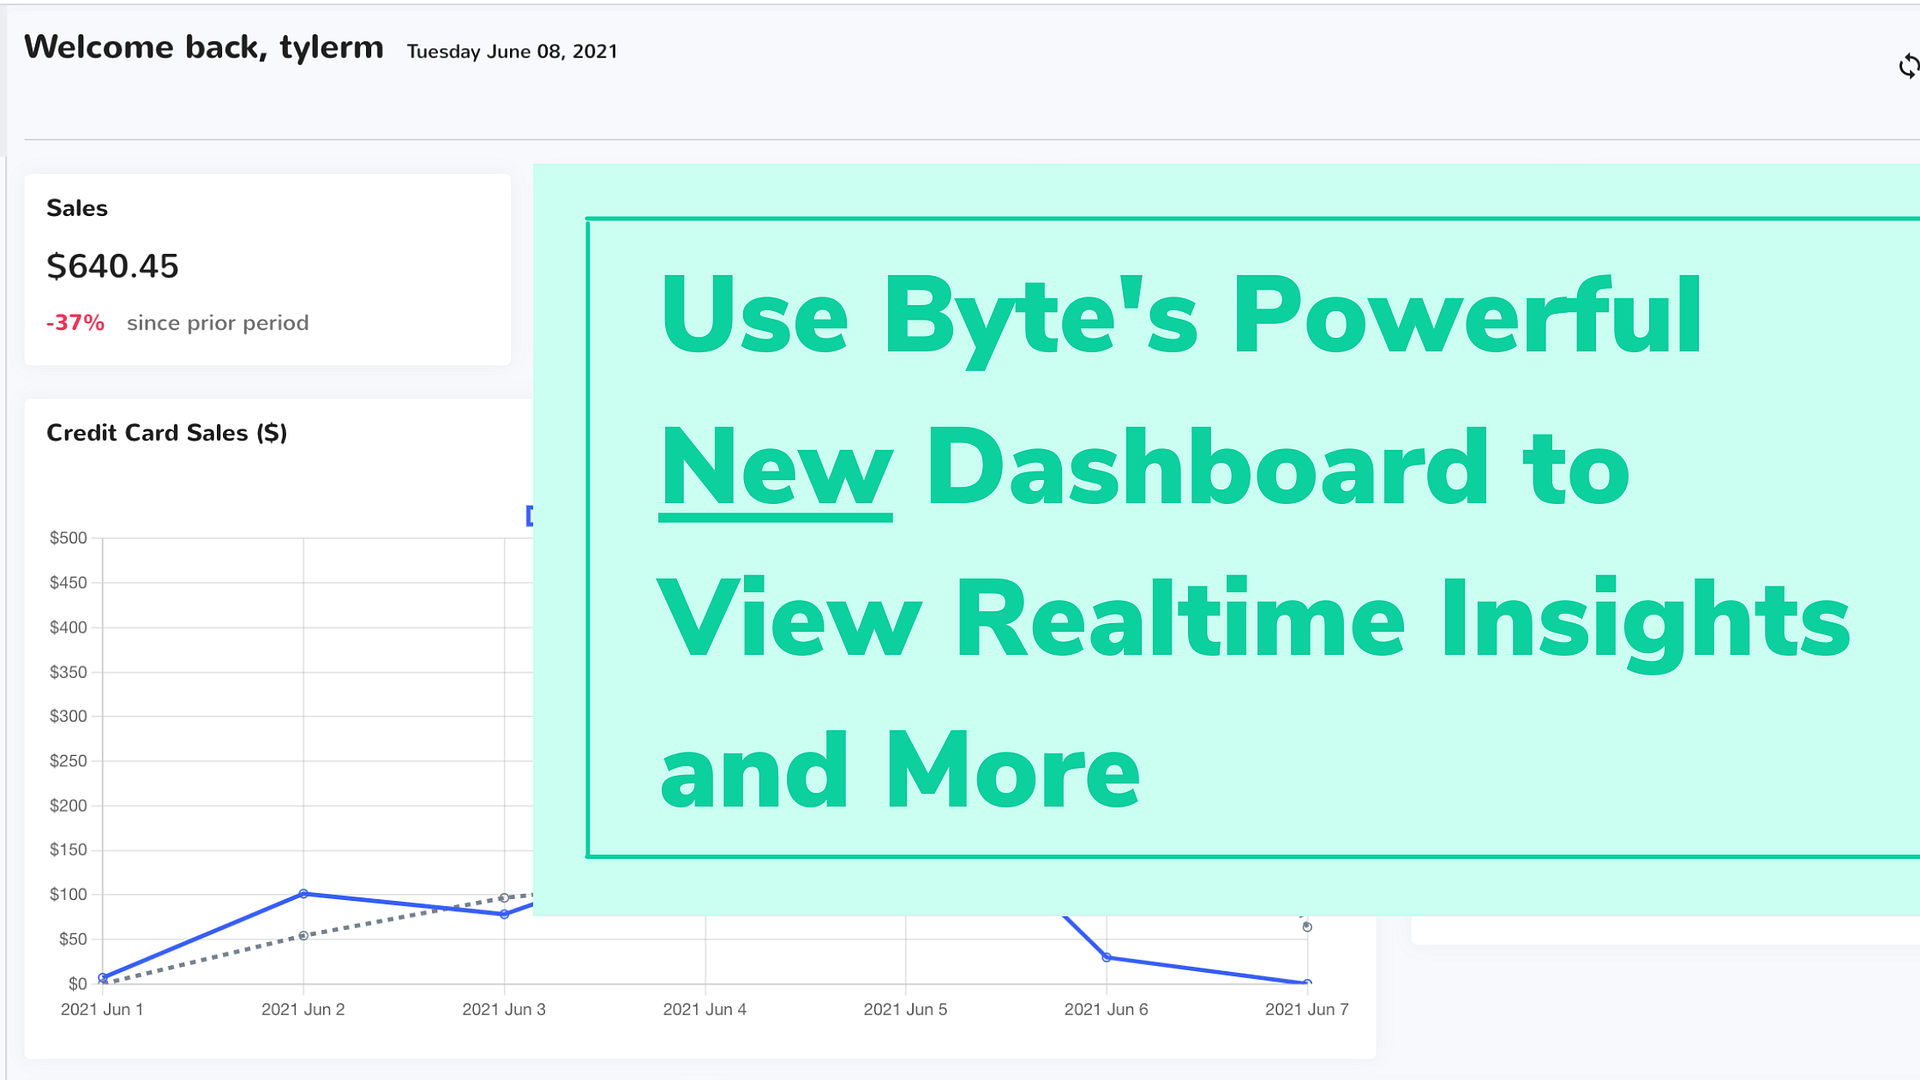 How Will Byte’s Powerful New Dashboard Give You Better Realtime Insights & Useful Reports?